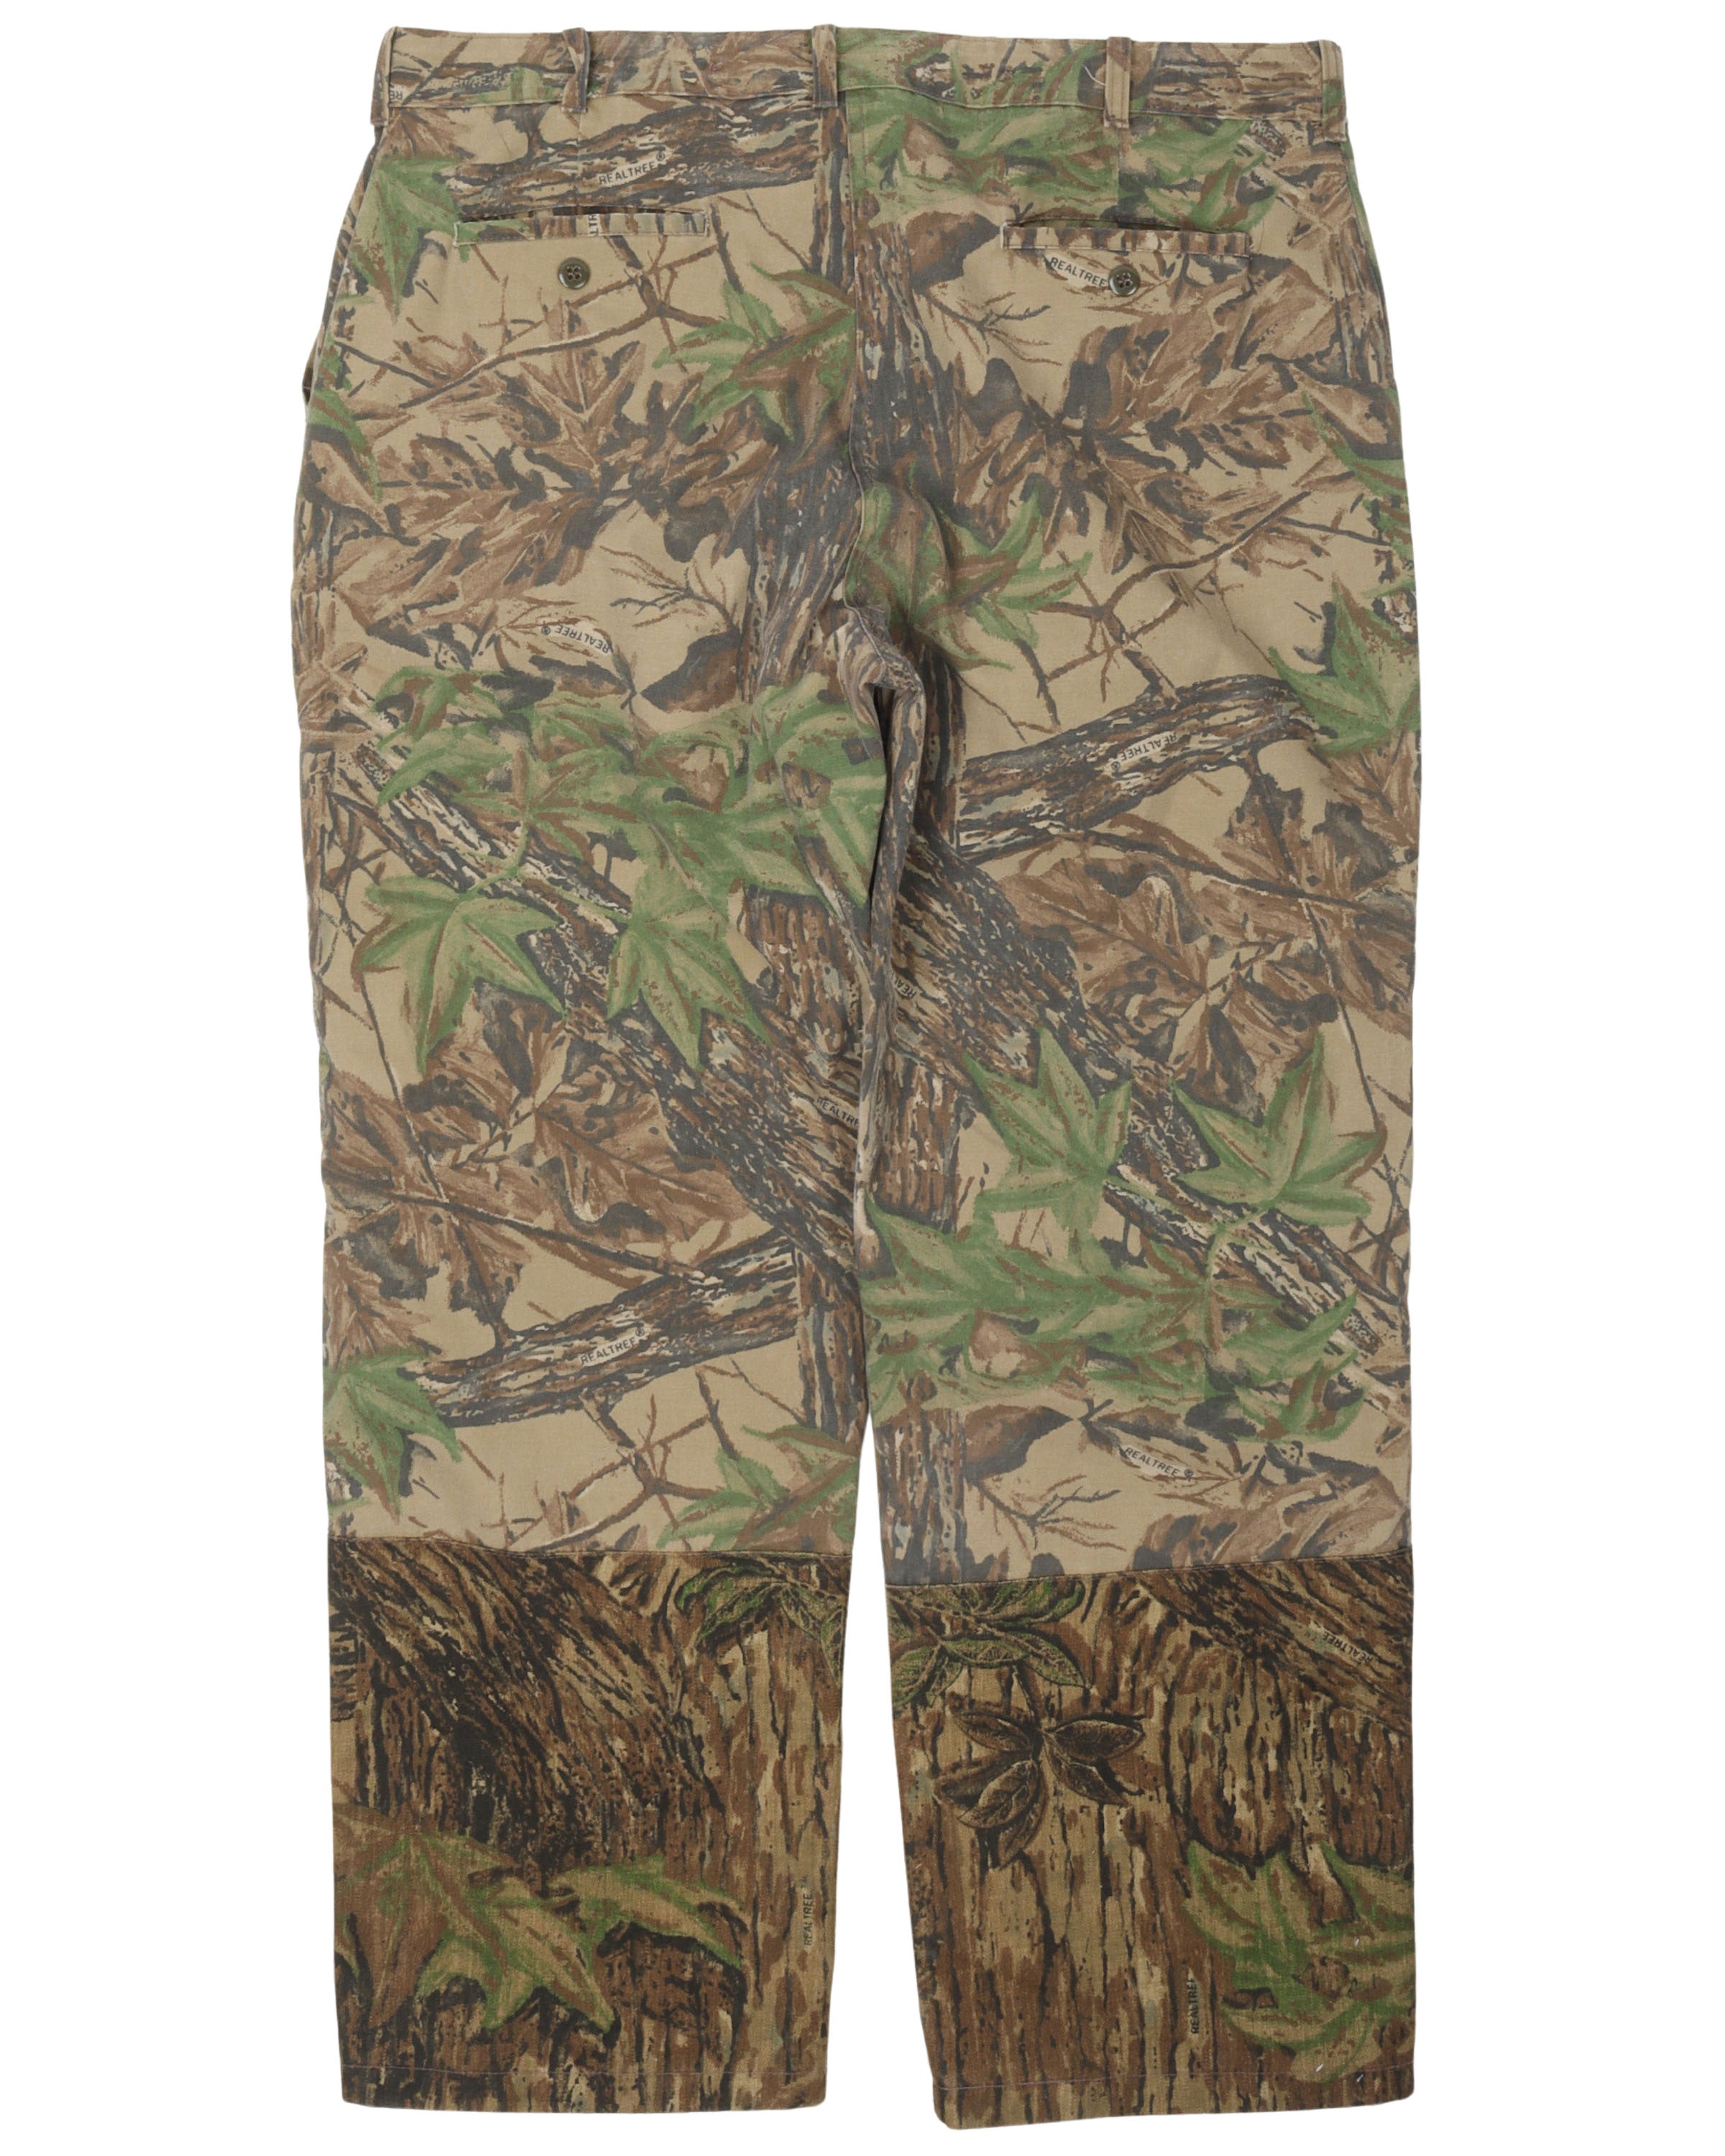 Rattlers RealTree Camouflage Pants